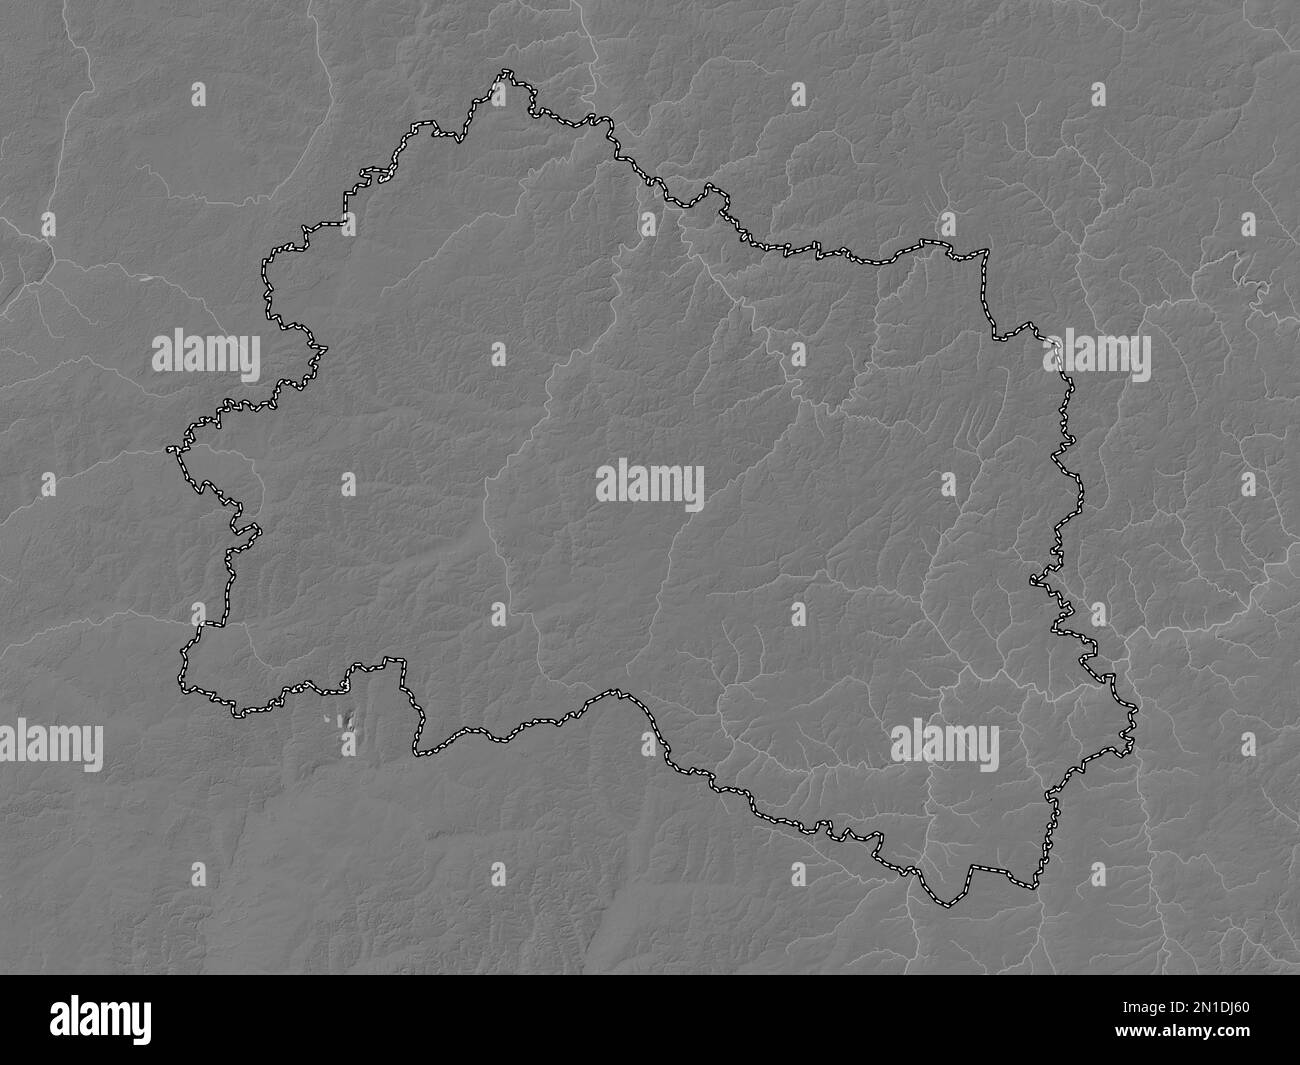 Orel, region of Russia. Grayscale elevation map with lakes and rivers Stock Photo